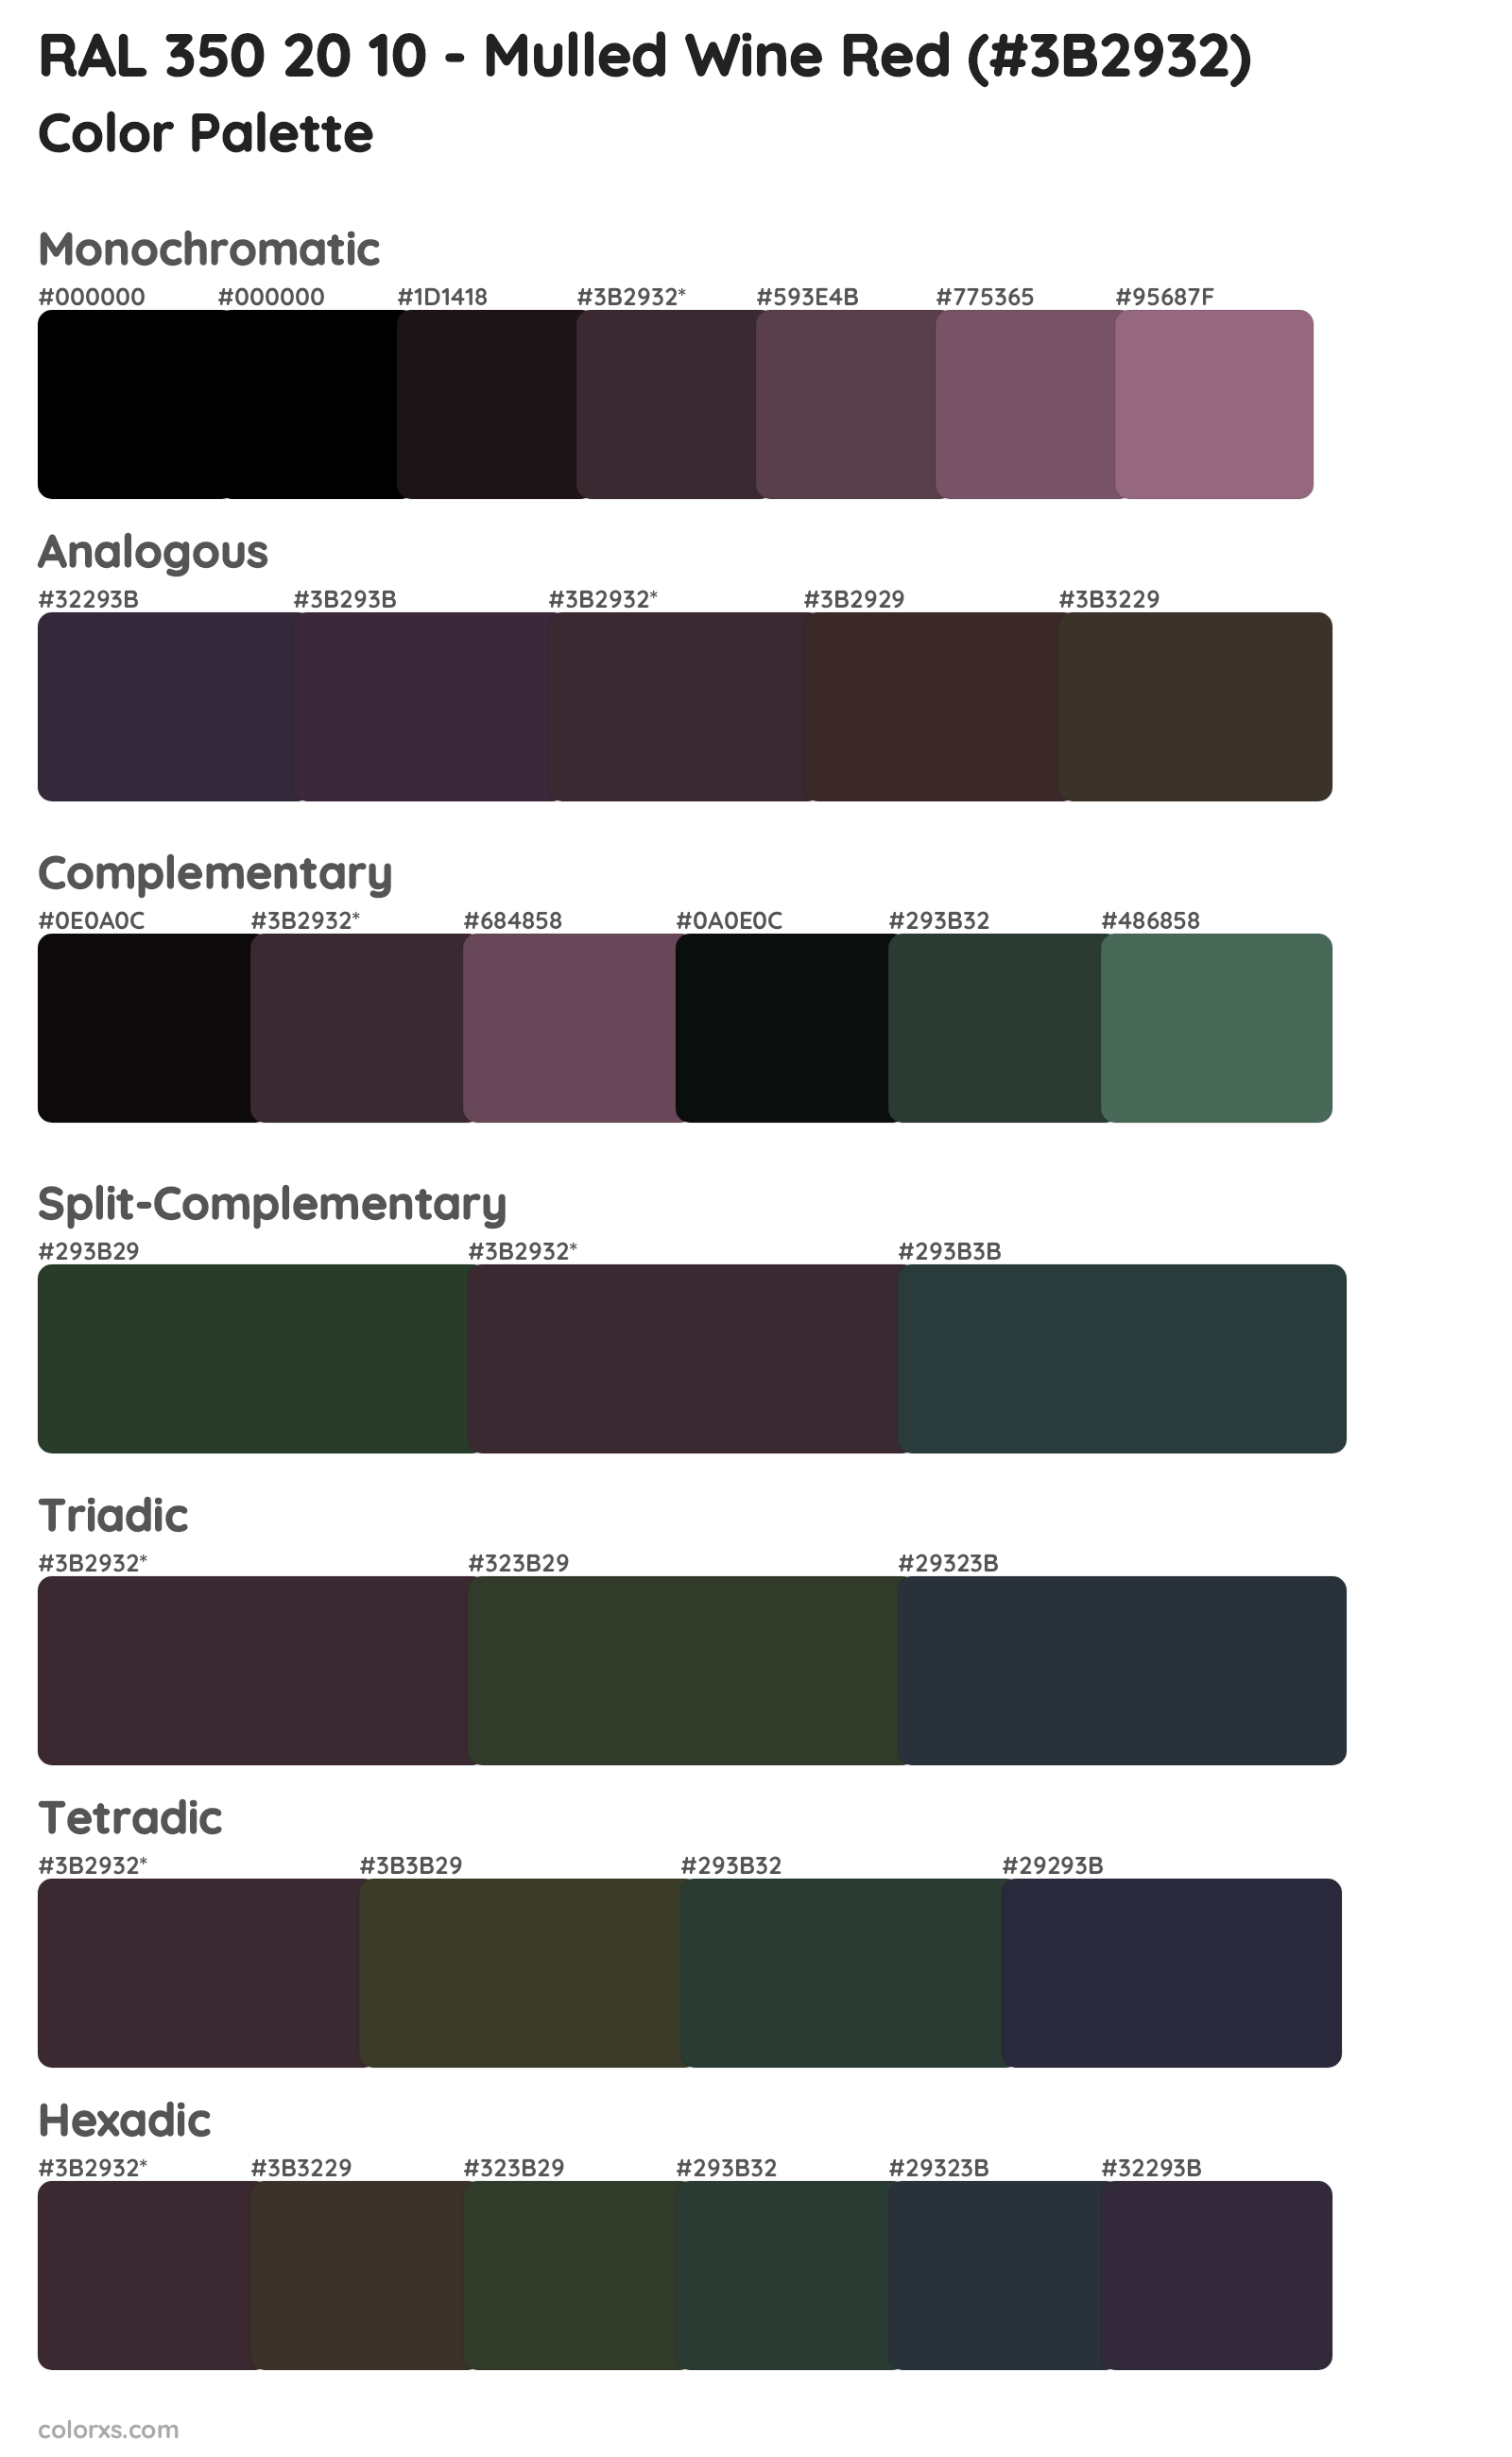 RAL 350 20 10 - Mulled Wine Red Color Scheme Palettes